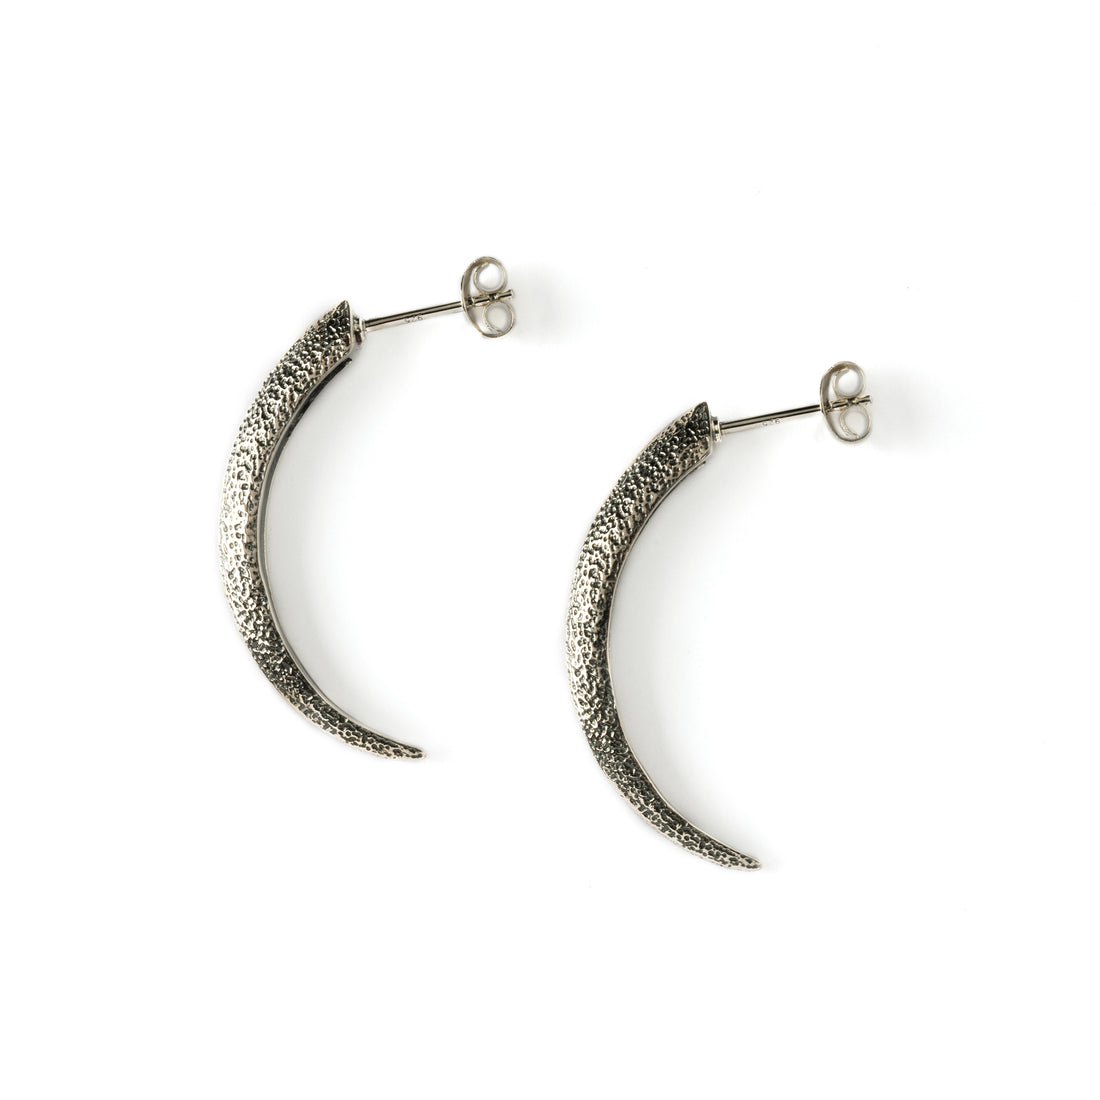 textured oxidised silver talon shaped post earrings right side view